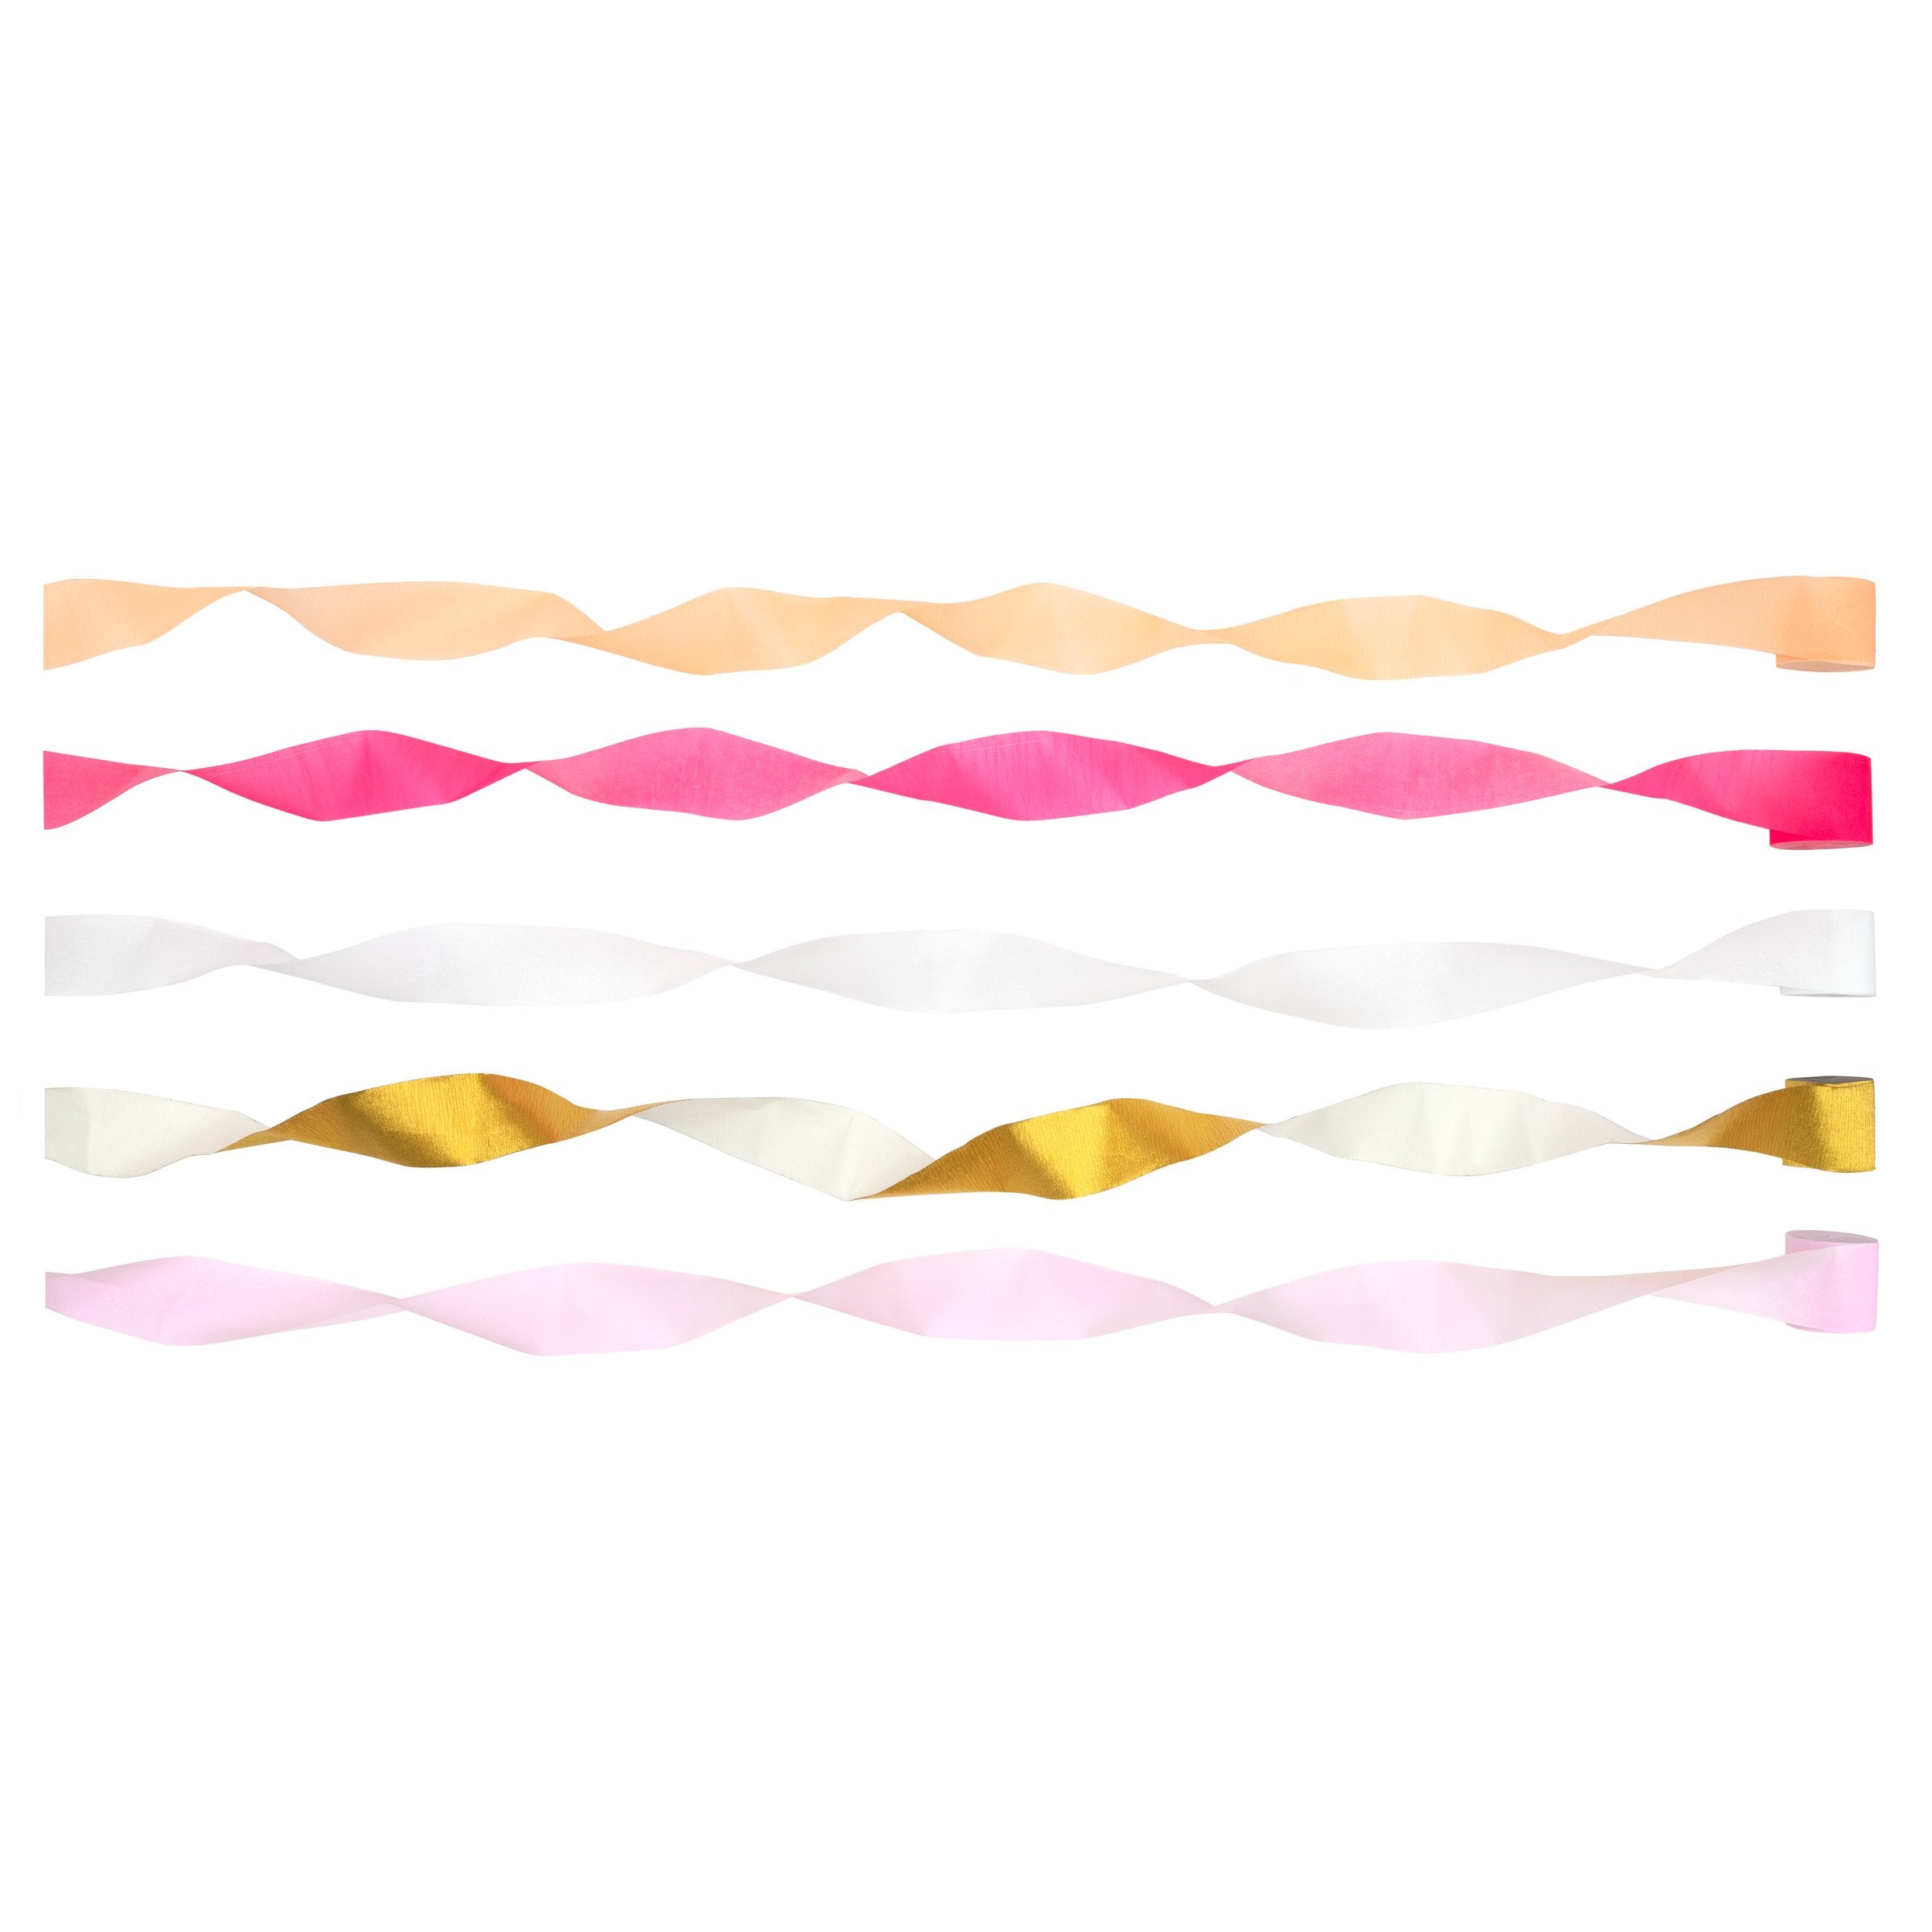 Our streamers are crafted from crepe paper in pink and gold, perfect for baby shower decorations girl.